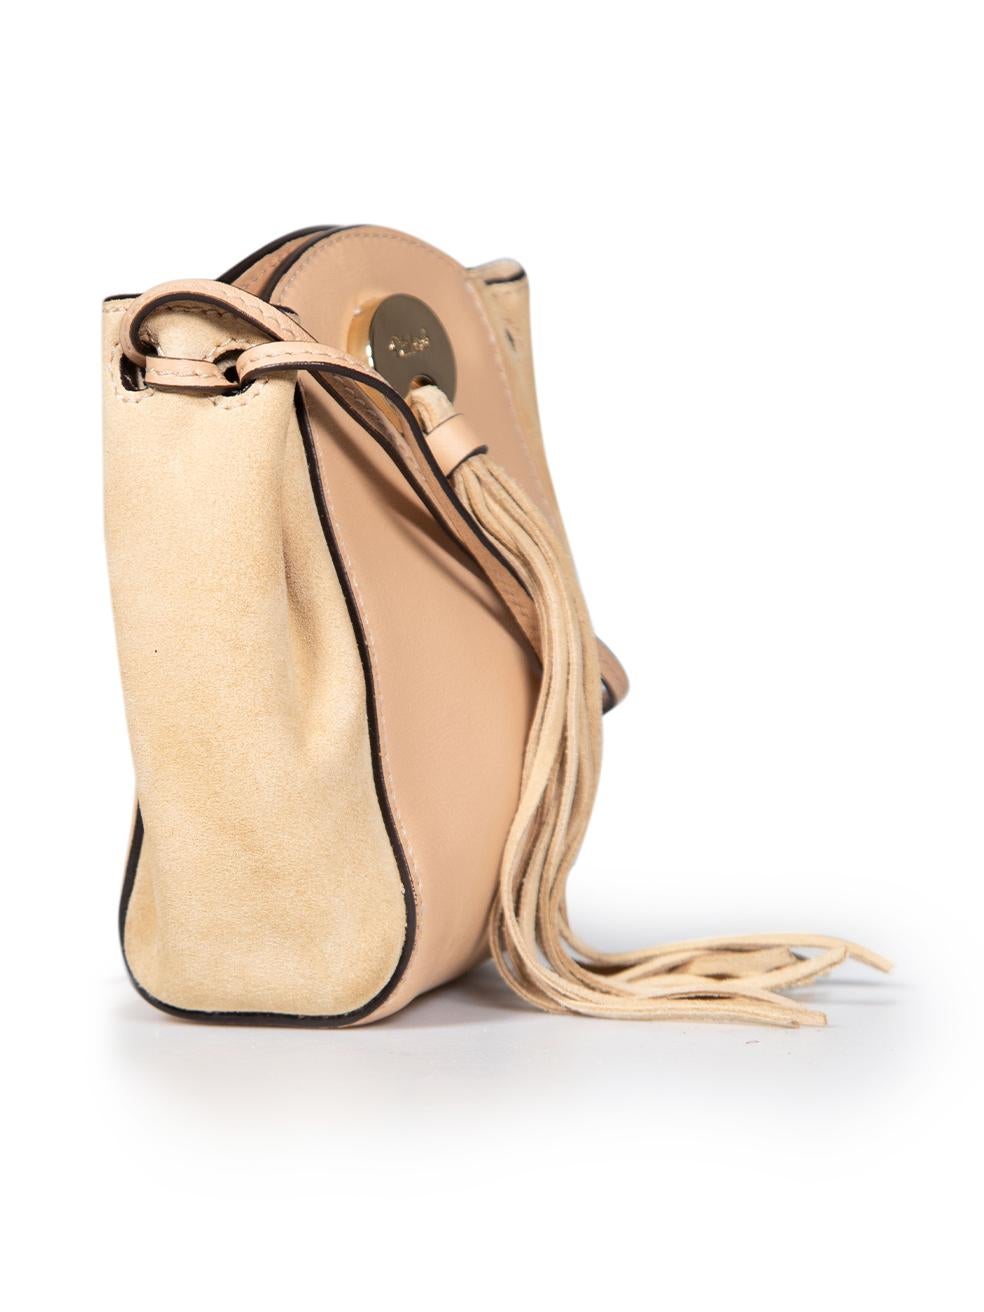 CONDITION is Very good. Minimal wear to bag is evident. Minimal wear to the leather above the logo plaque with light peeling and there is a tiny mark at the rear on this used Chloé designer resale item.
 
 
 
 Details
 
 
 Model: Sac
 
 Beige
 
